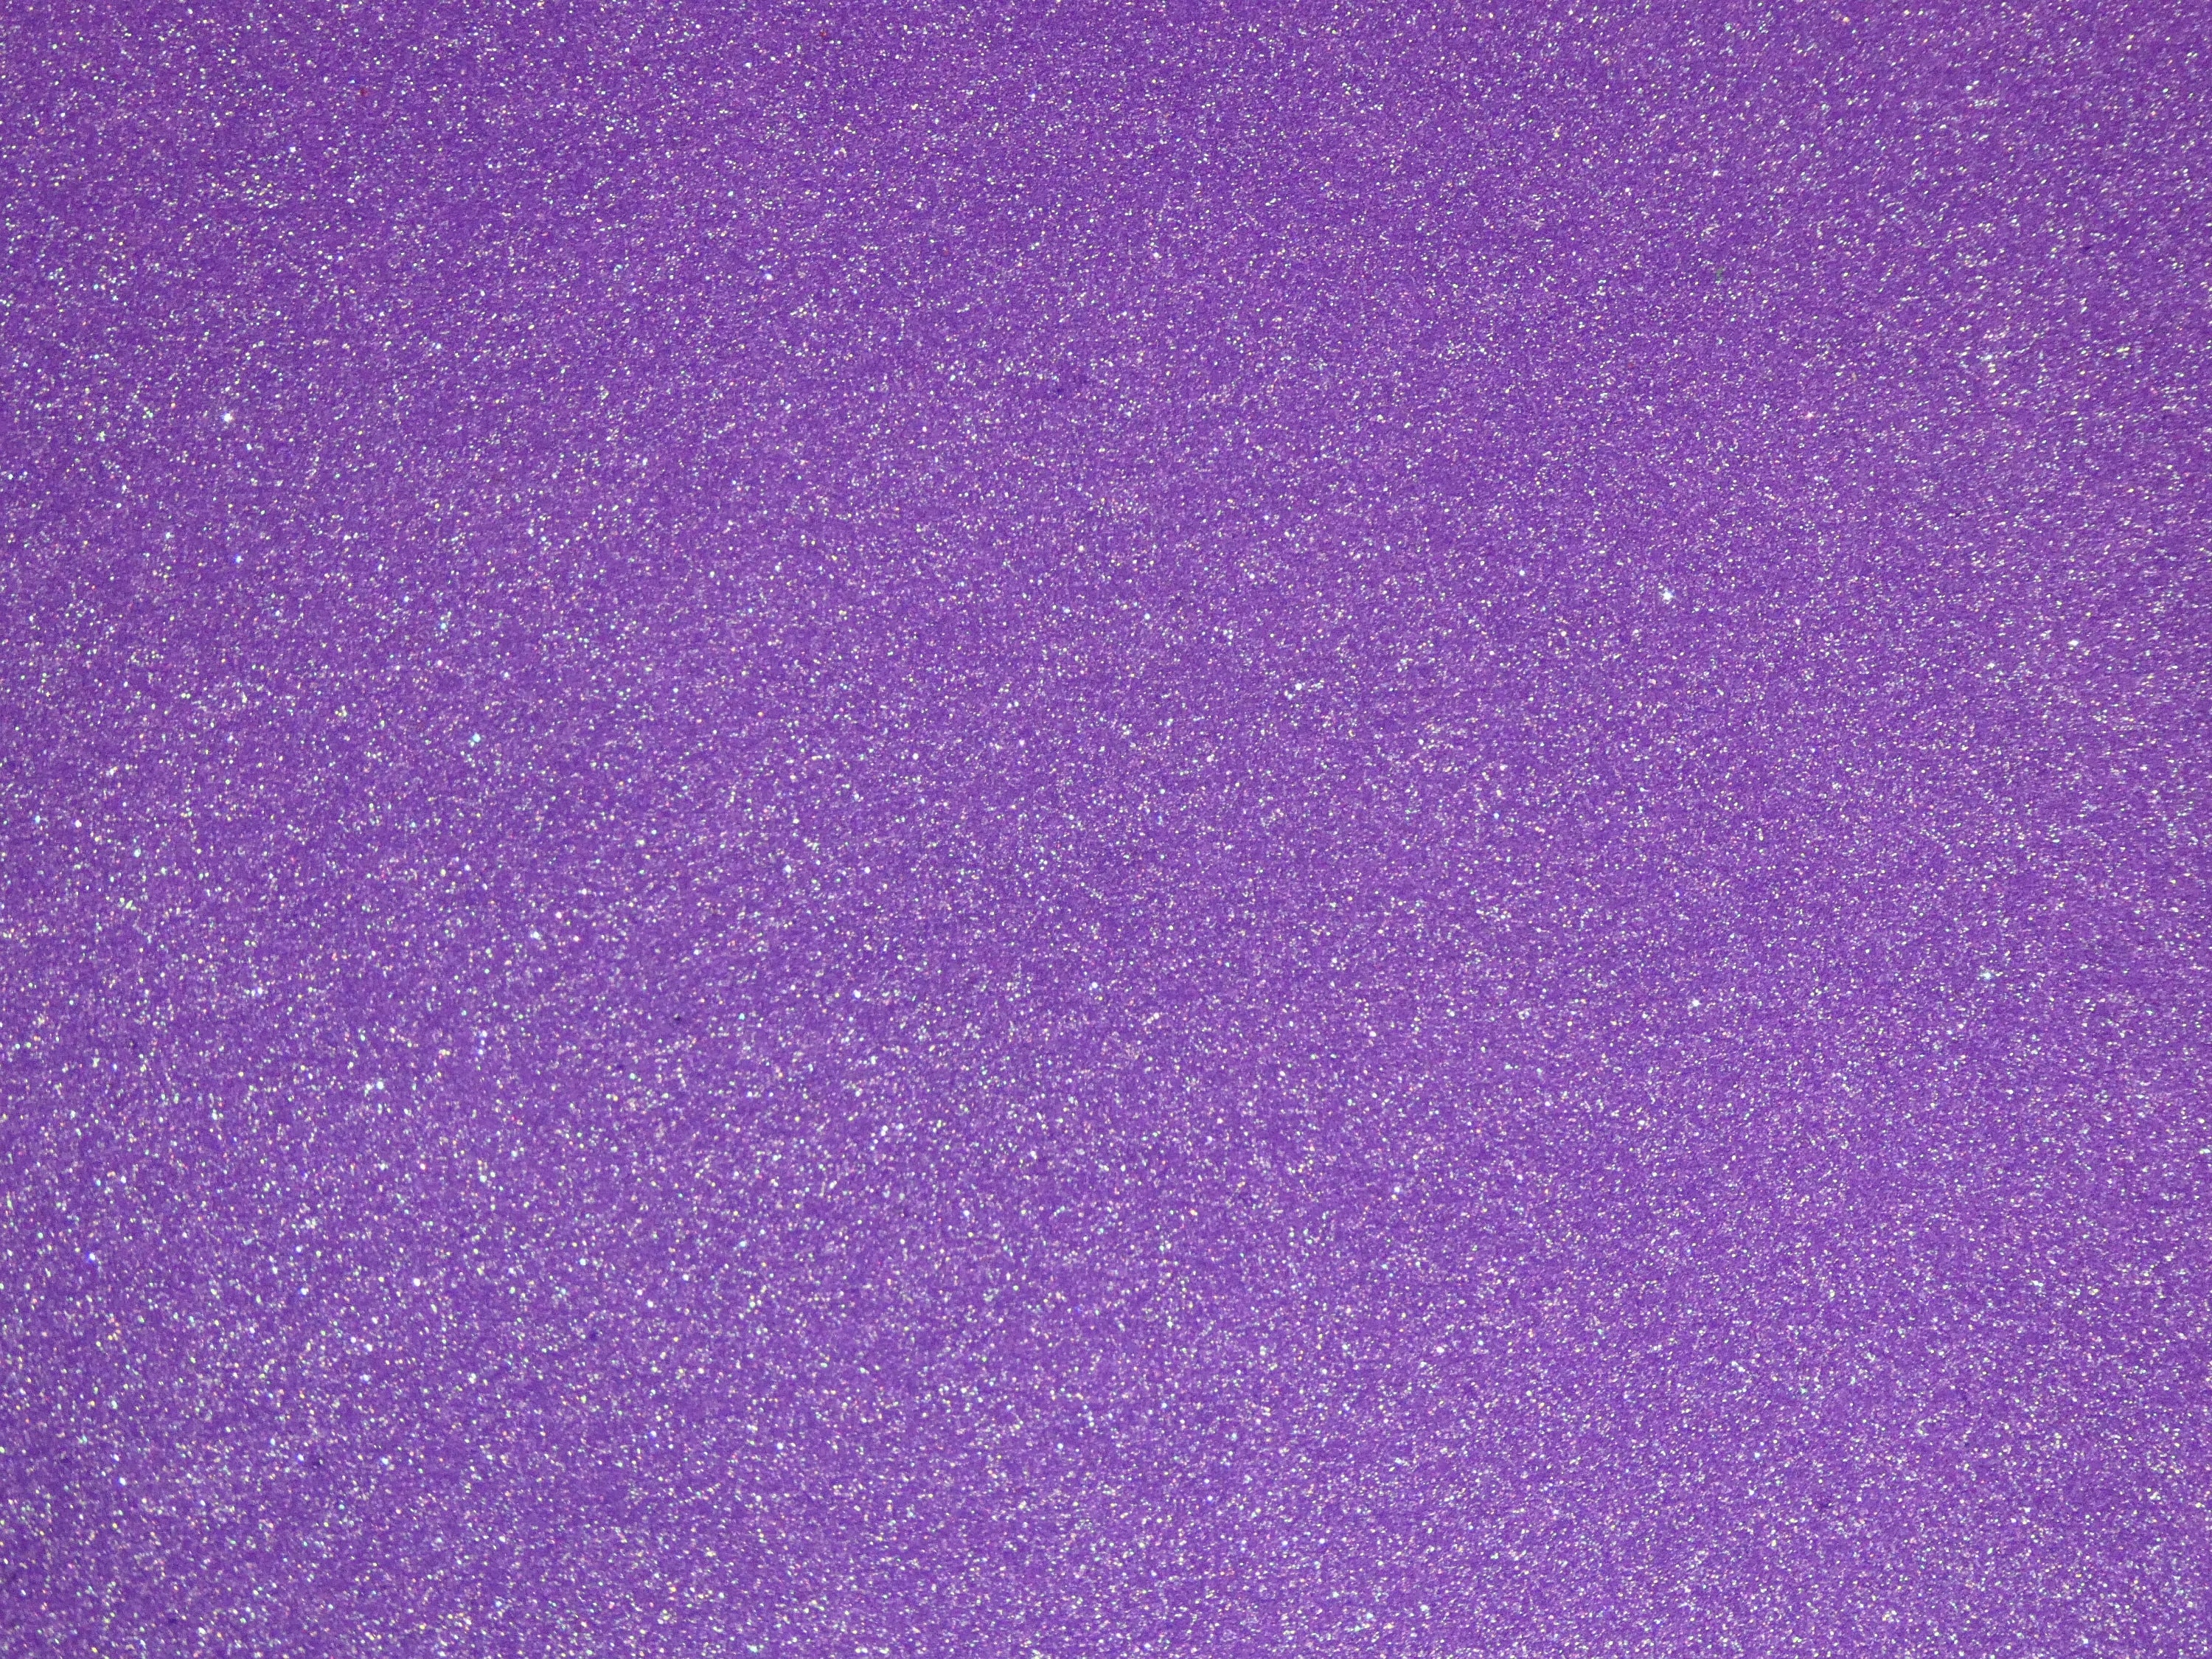 Chunky Glitter 2 pieces 4x6 ROYAL Blue Metallic Fabric applied to Leather  THICK 6 oz/2.4mm PeggySueAlso® E4355-09